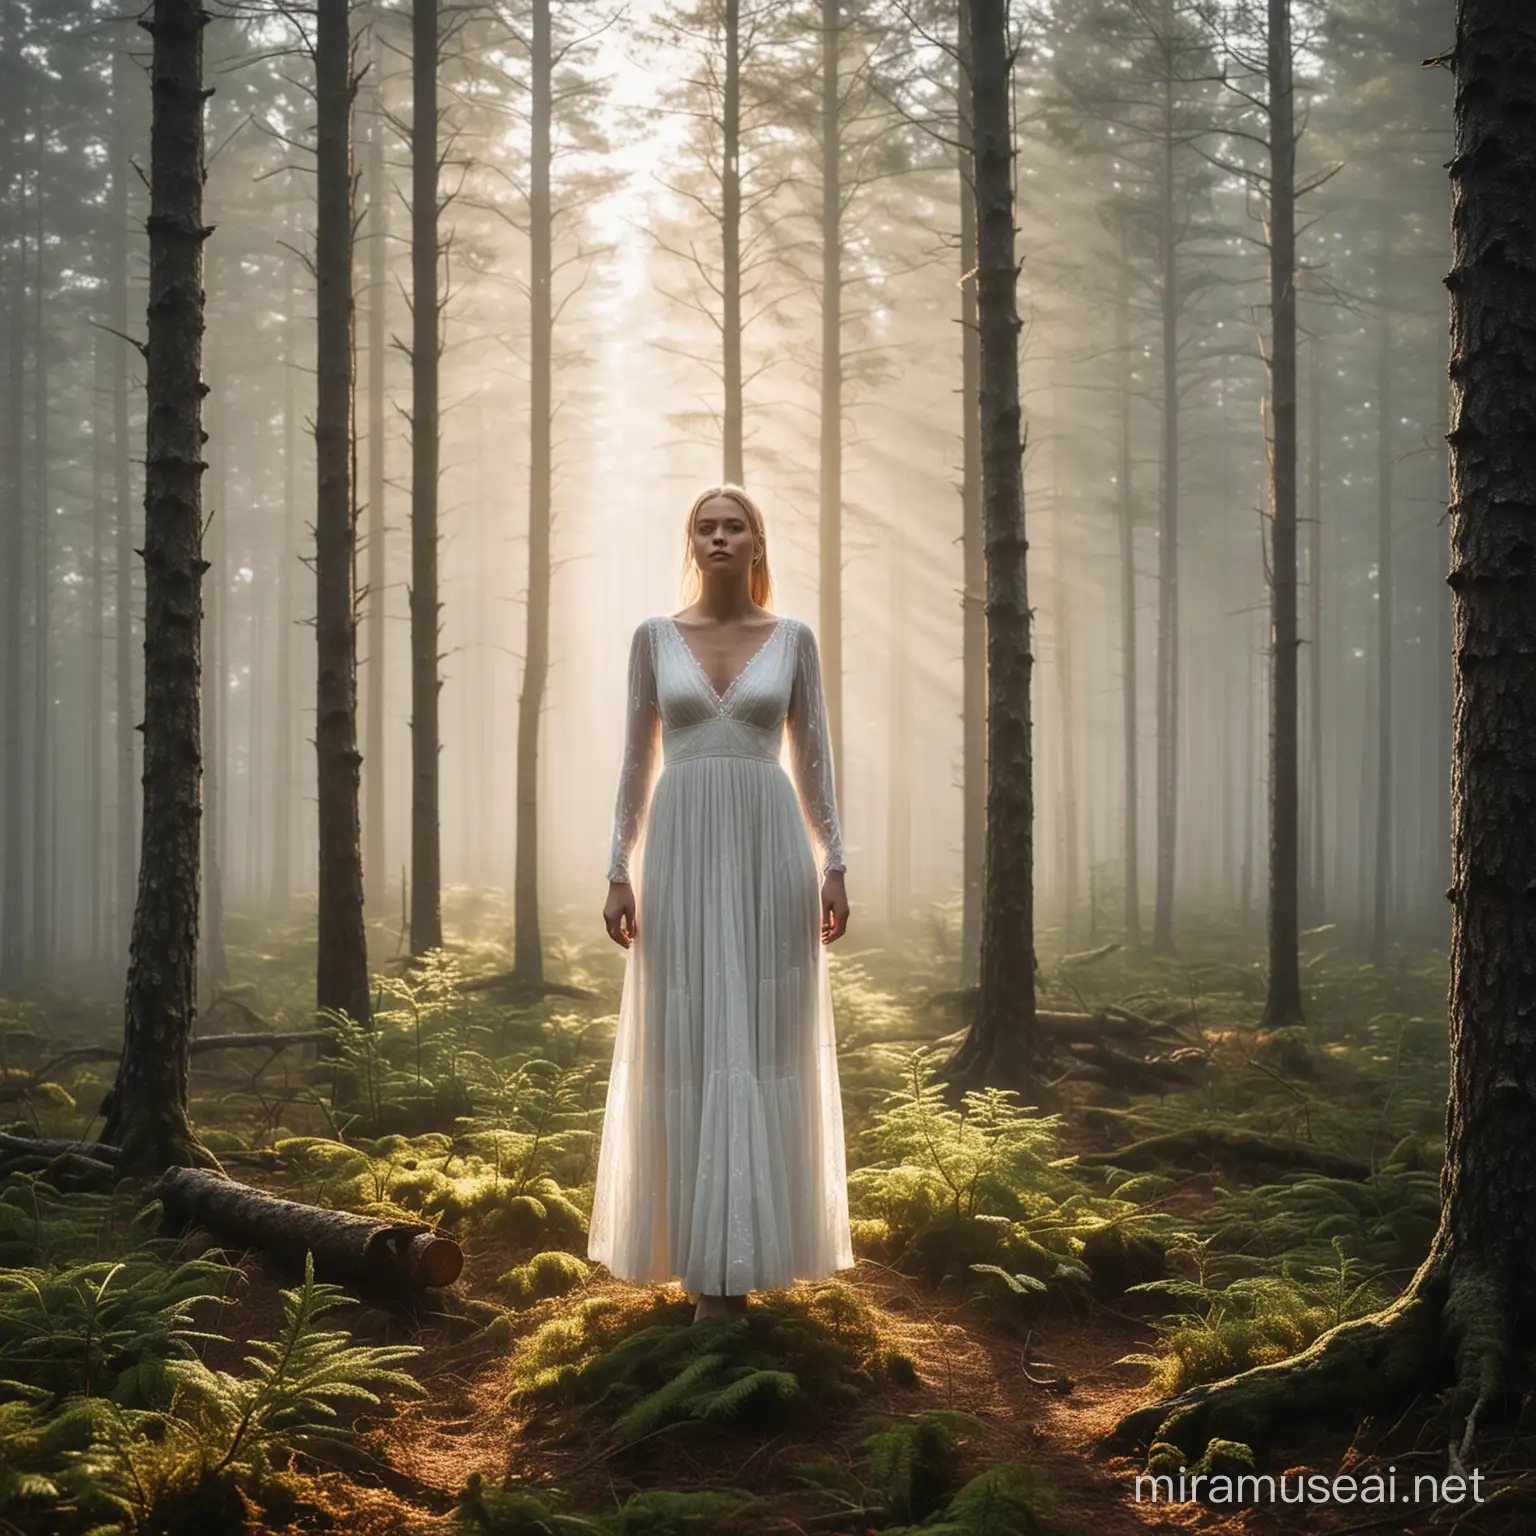 Enchanting Morning in Finnish Spruce Forest with Ethereal Woman